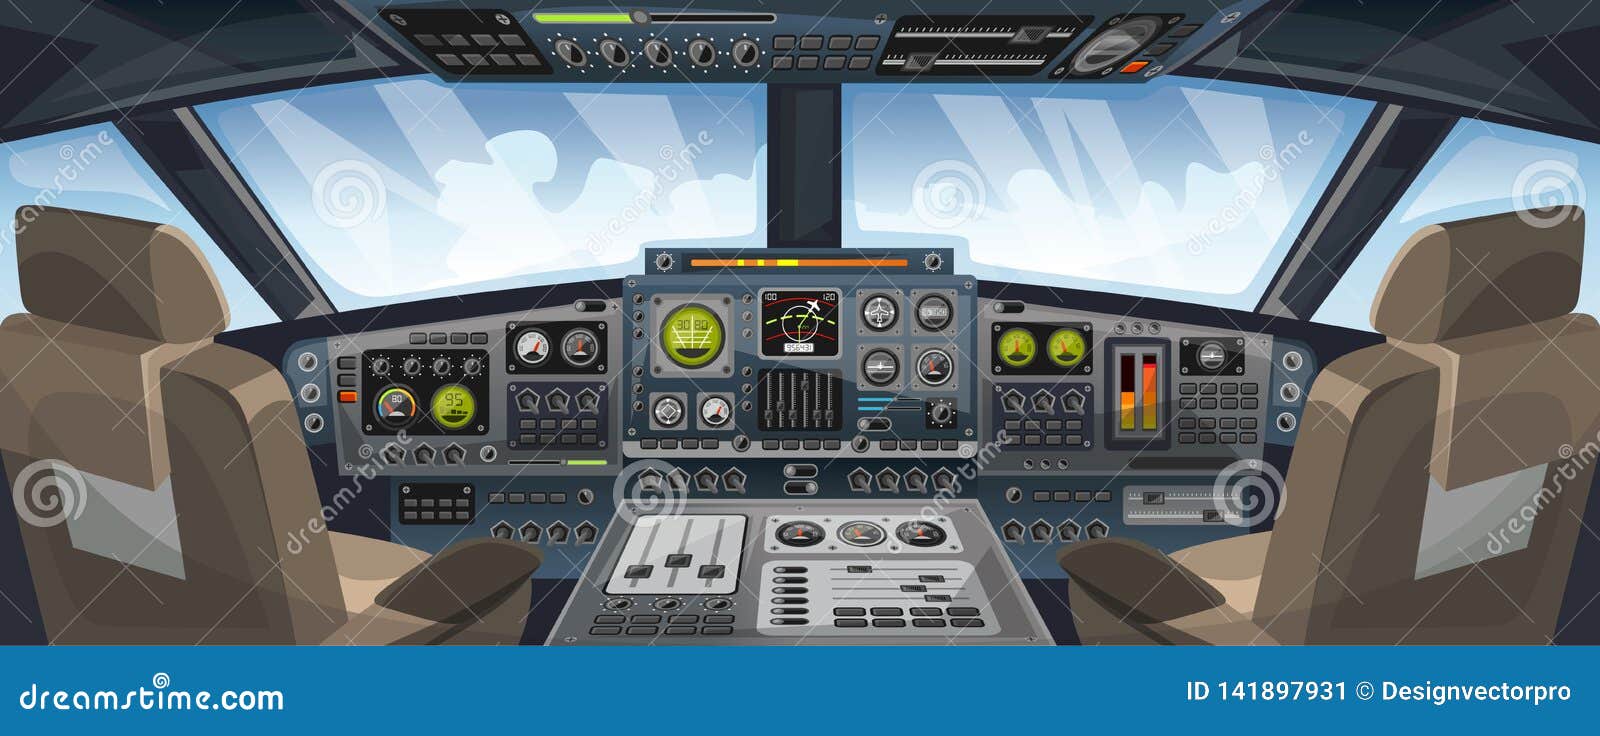 airplane cockpit view with control panel buttons and sky background on window view. airplane pilots cabin with dashboard control